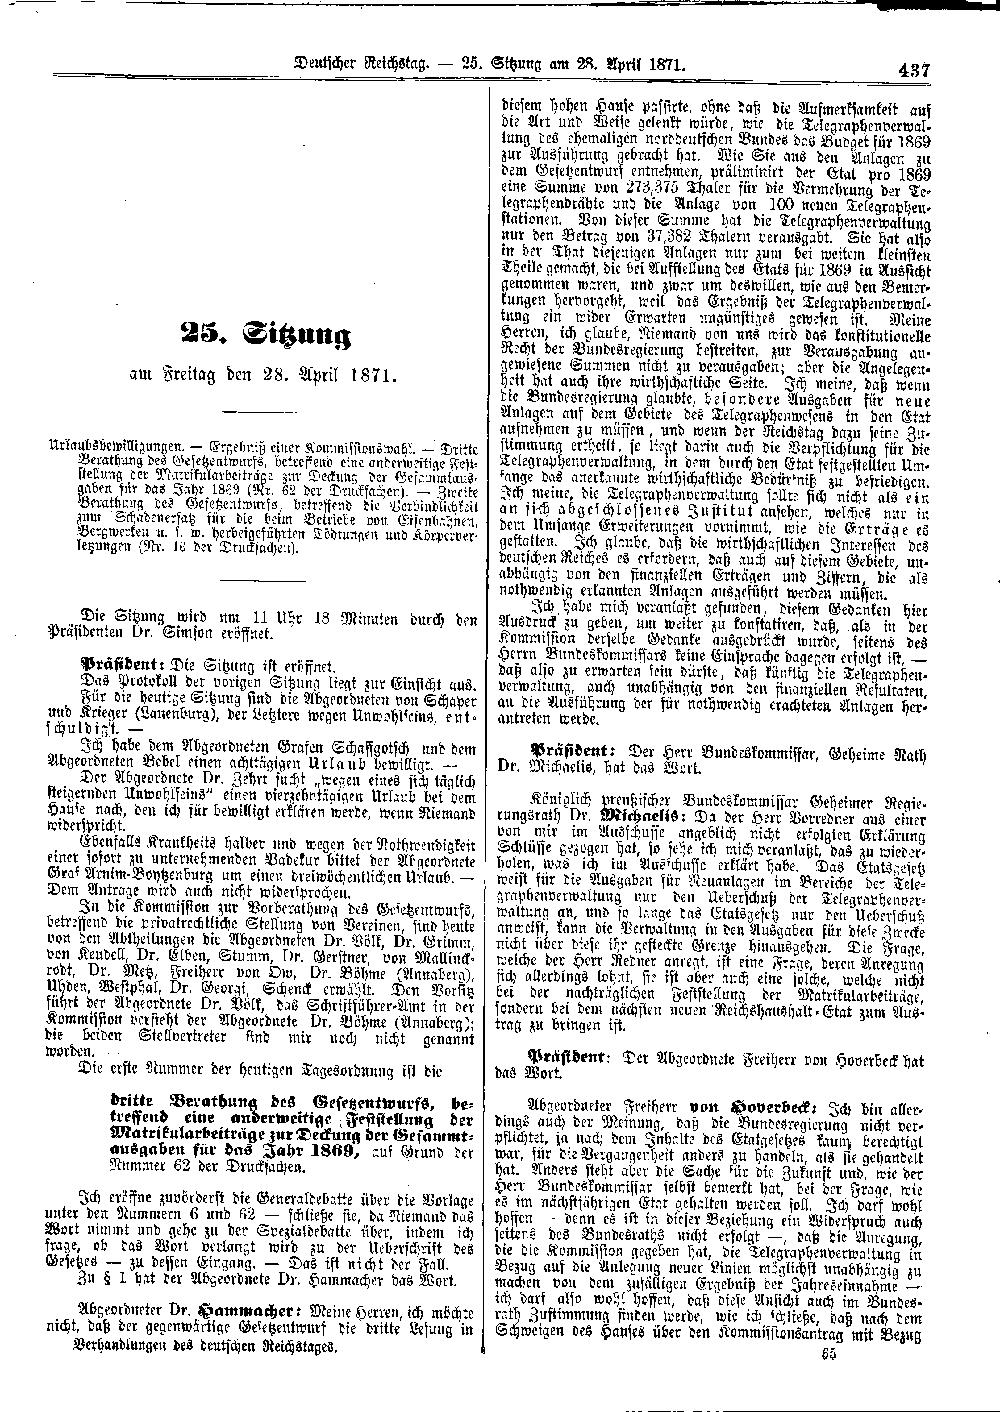 Scan of page 437